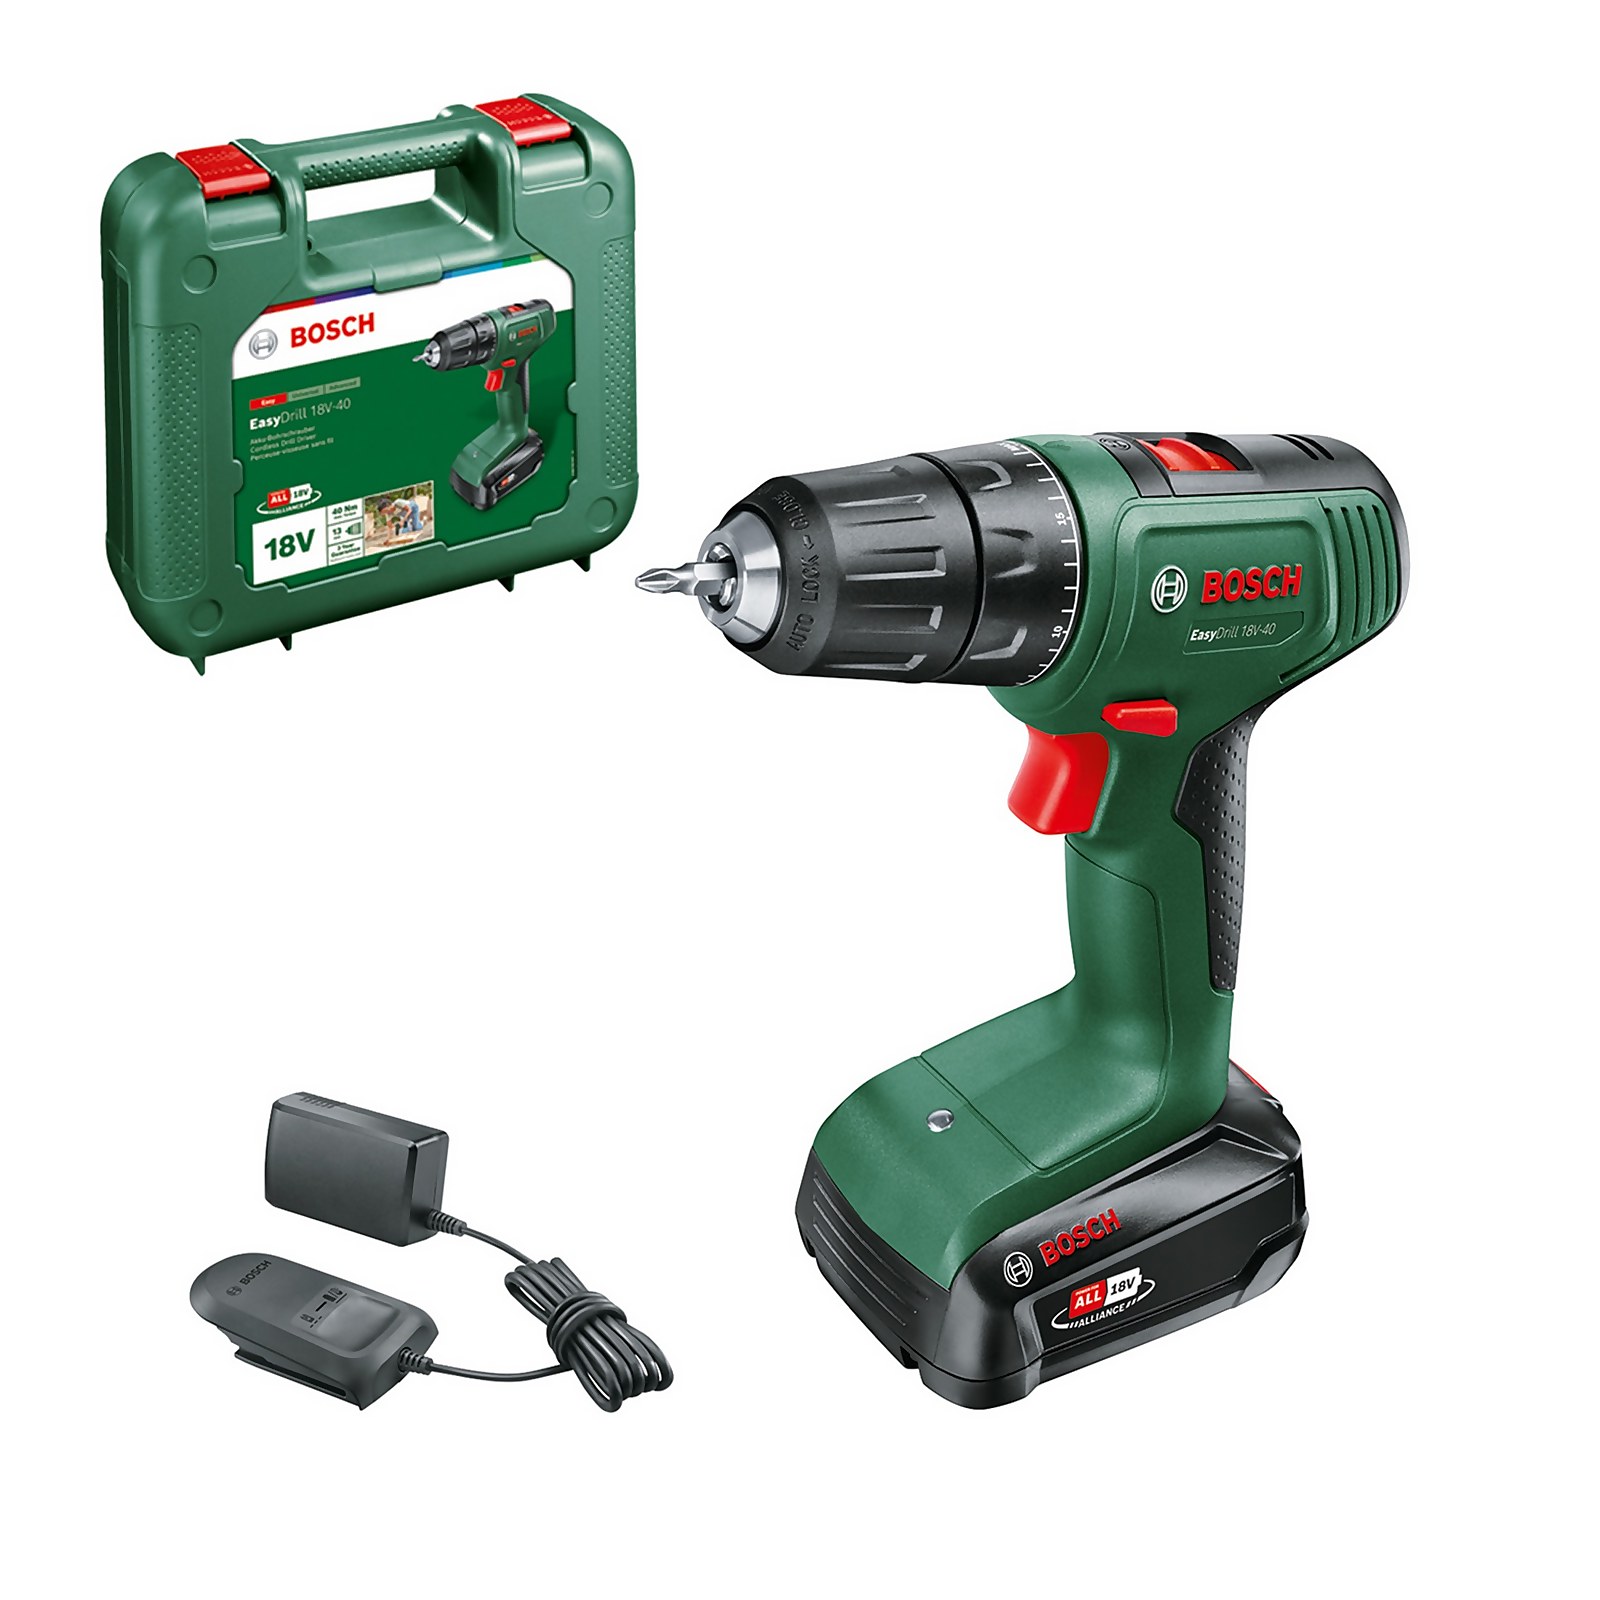 Photo of Bosch Easydrill 18v-40 With 1 X 2ah Battery- Charger & Case